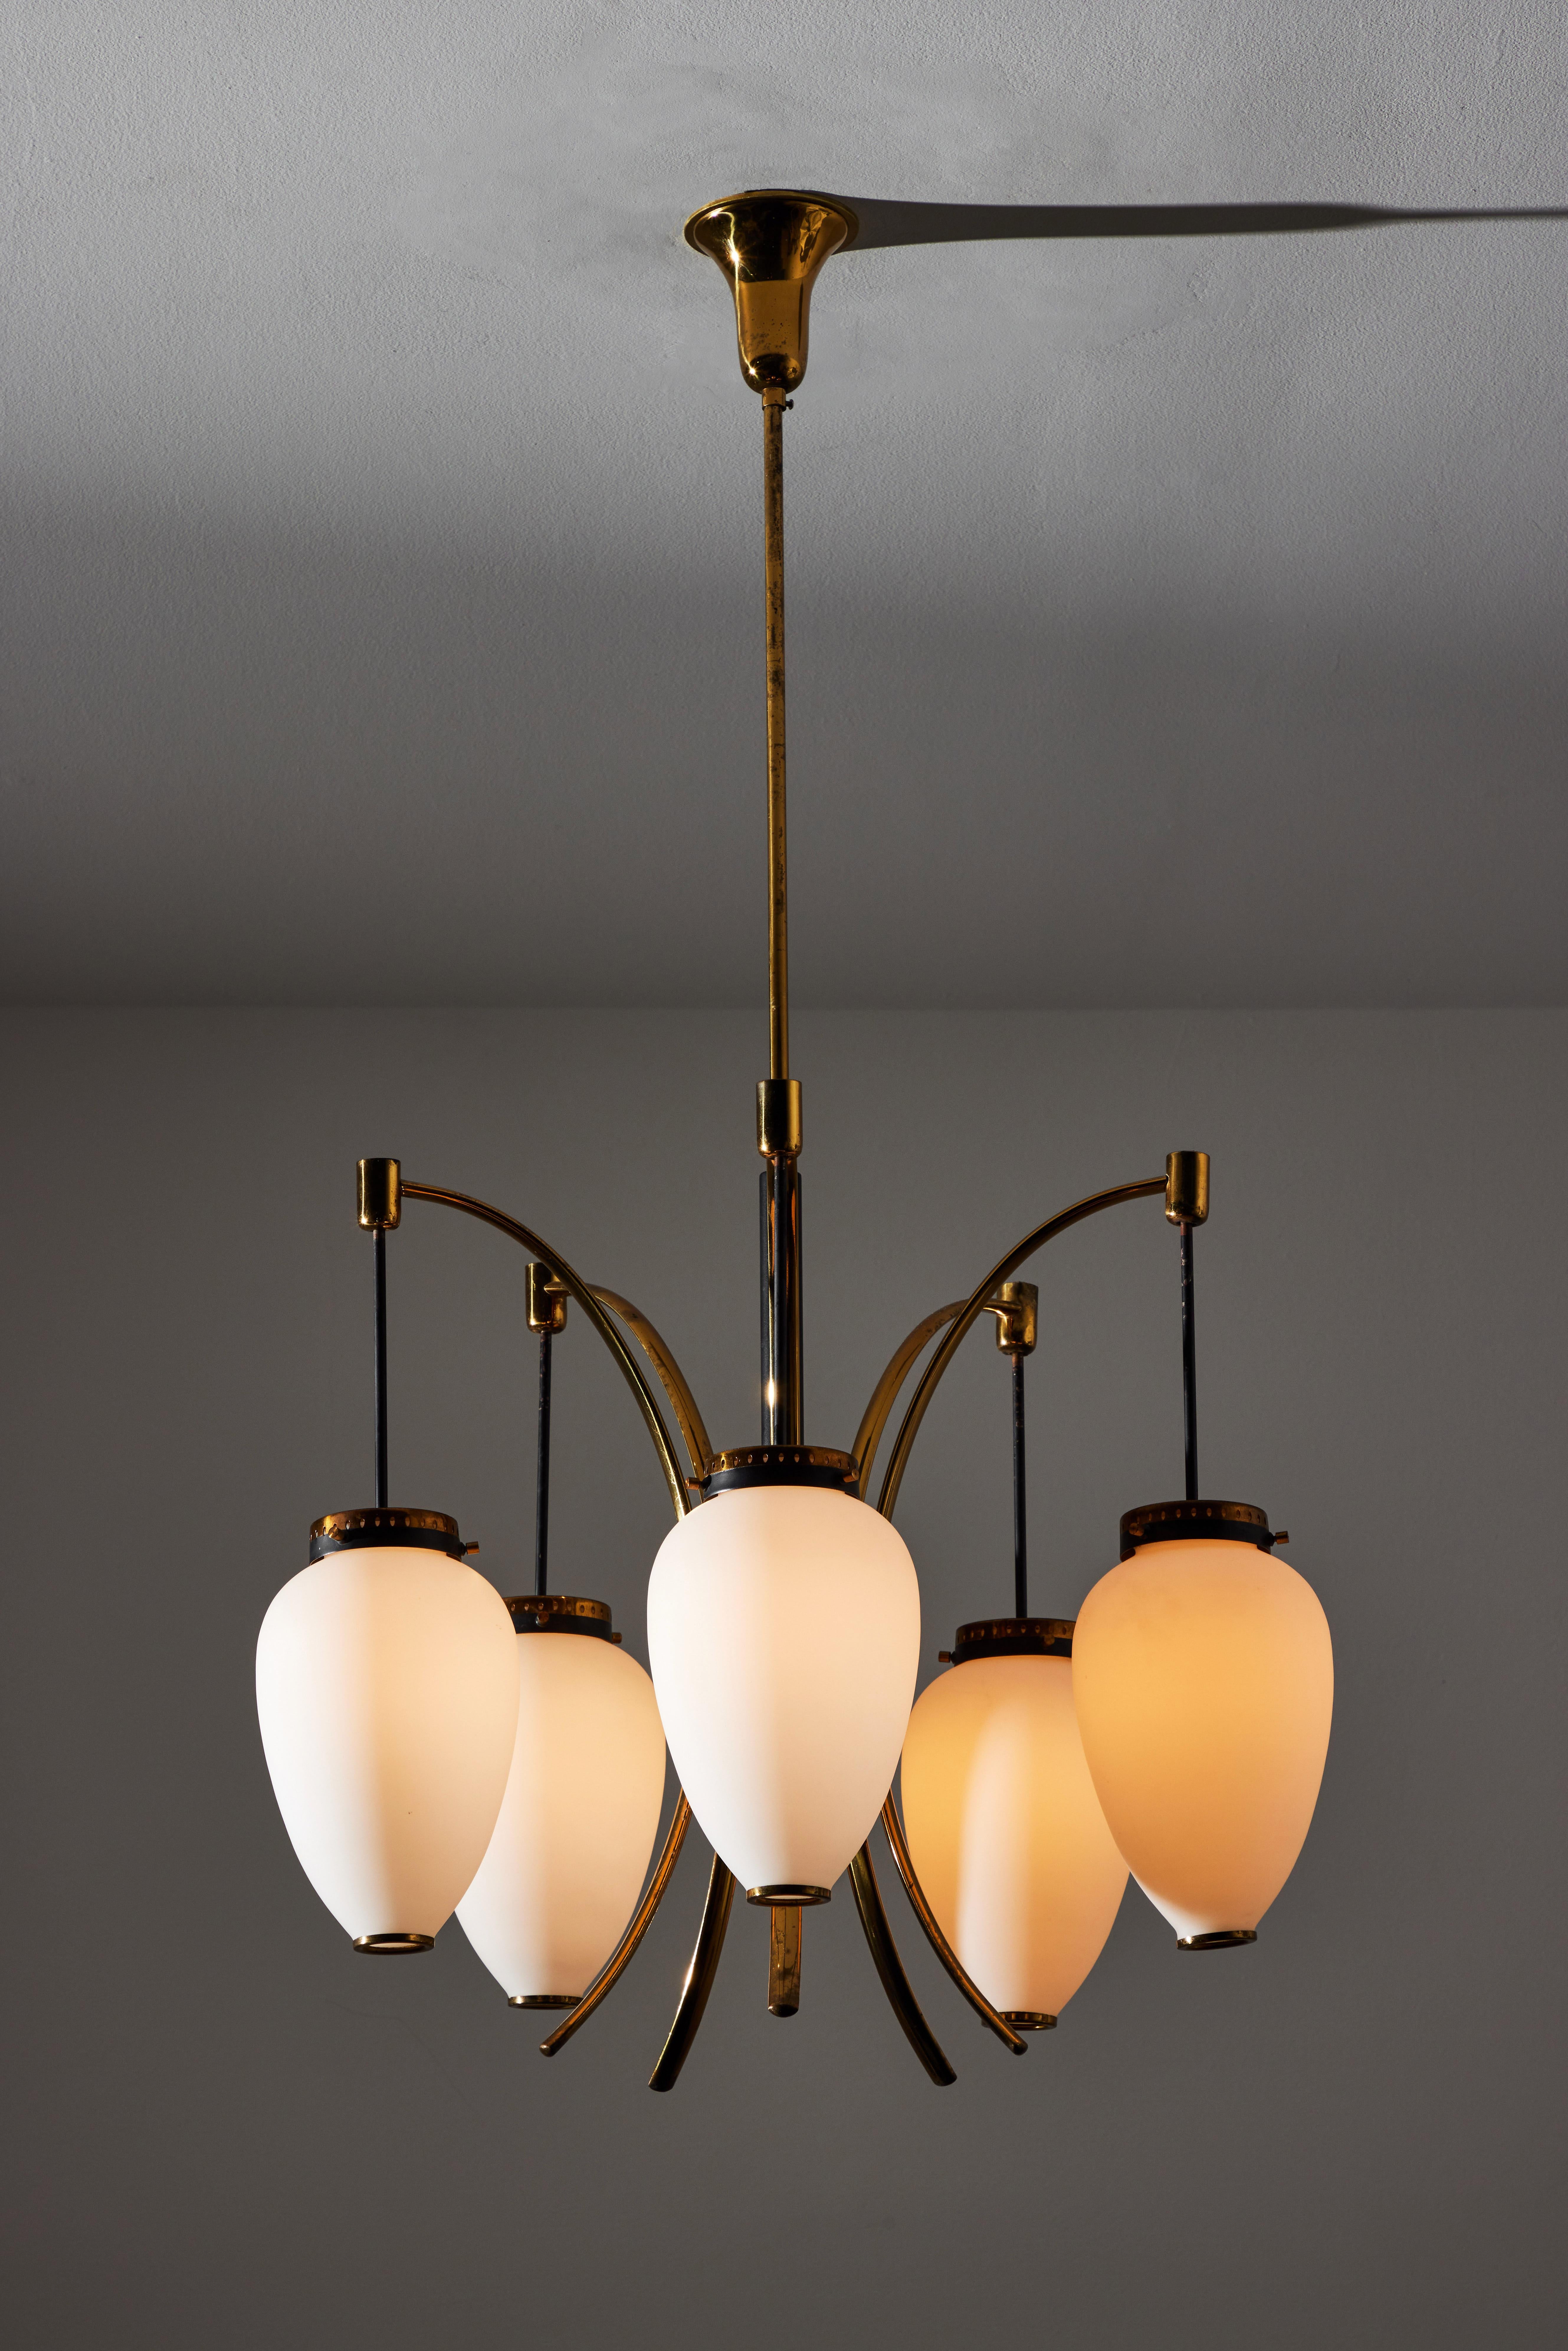 Suspension light by Stilnovo. Manufactured in Italy, circa 1950s. Brushed satin glass diffusers, brass armature. Custom brass ceiling plate. Rewired for U.S. standards. We recommend five E14 40w maximums bulbs. Bulbs provided as a one time courtesy.